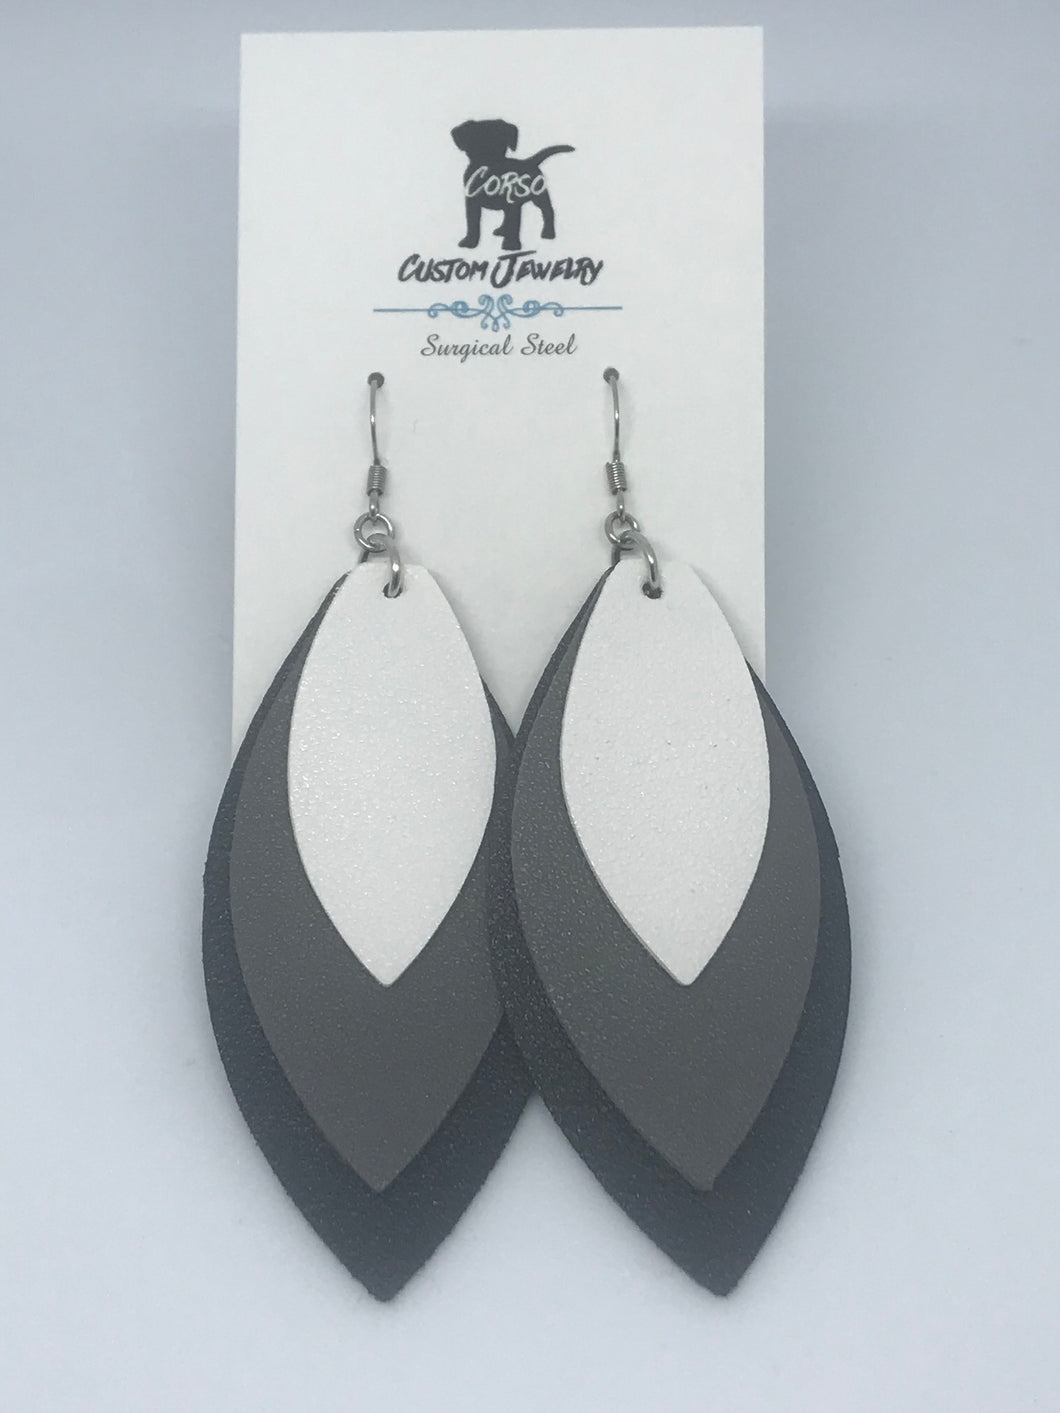 Shades of Grey Layered Leather Drop Earrings (Surgical Steel)